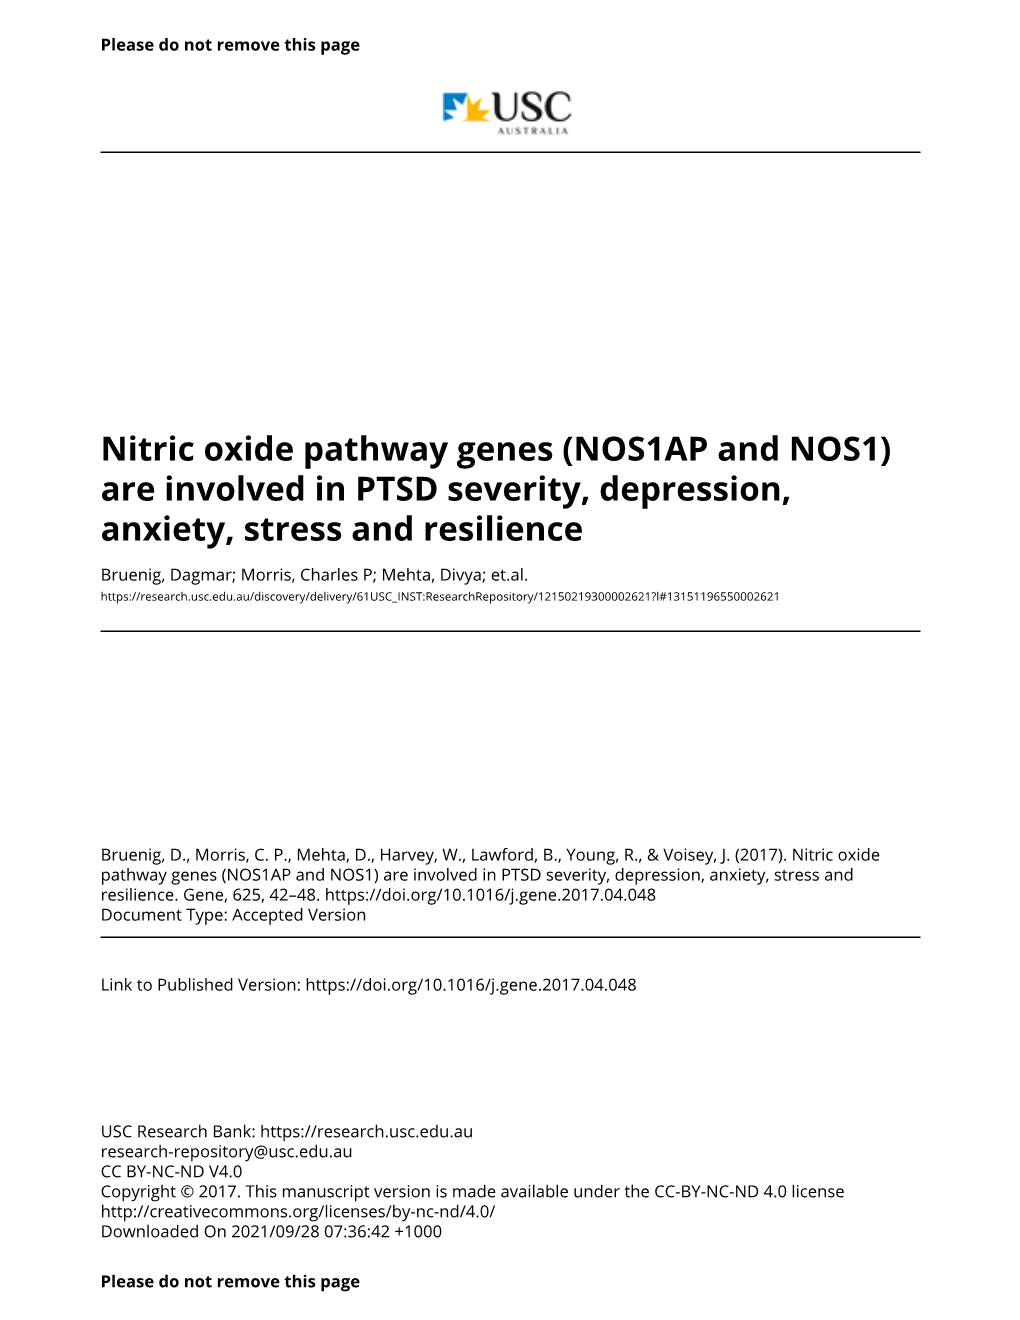 Nitric Oxide Pathway Genes (NOS1AP and NOS1) Are Involved in PTSD Severity, Depression, Anxiety, Stress and Resilience